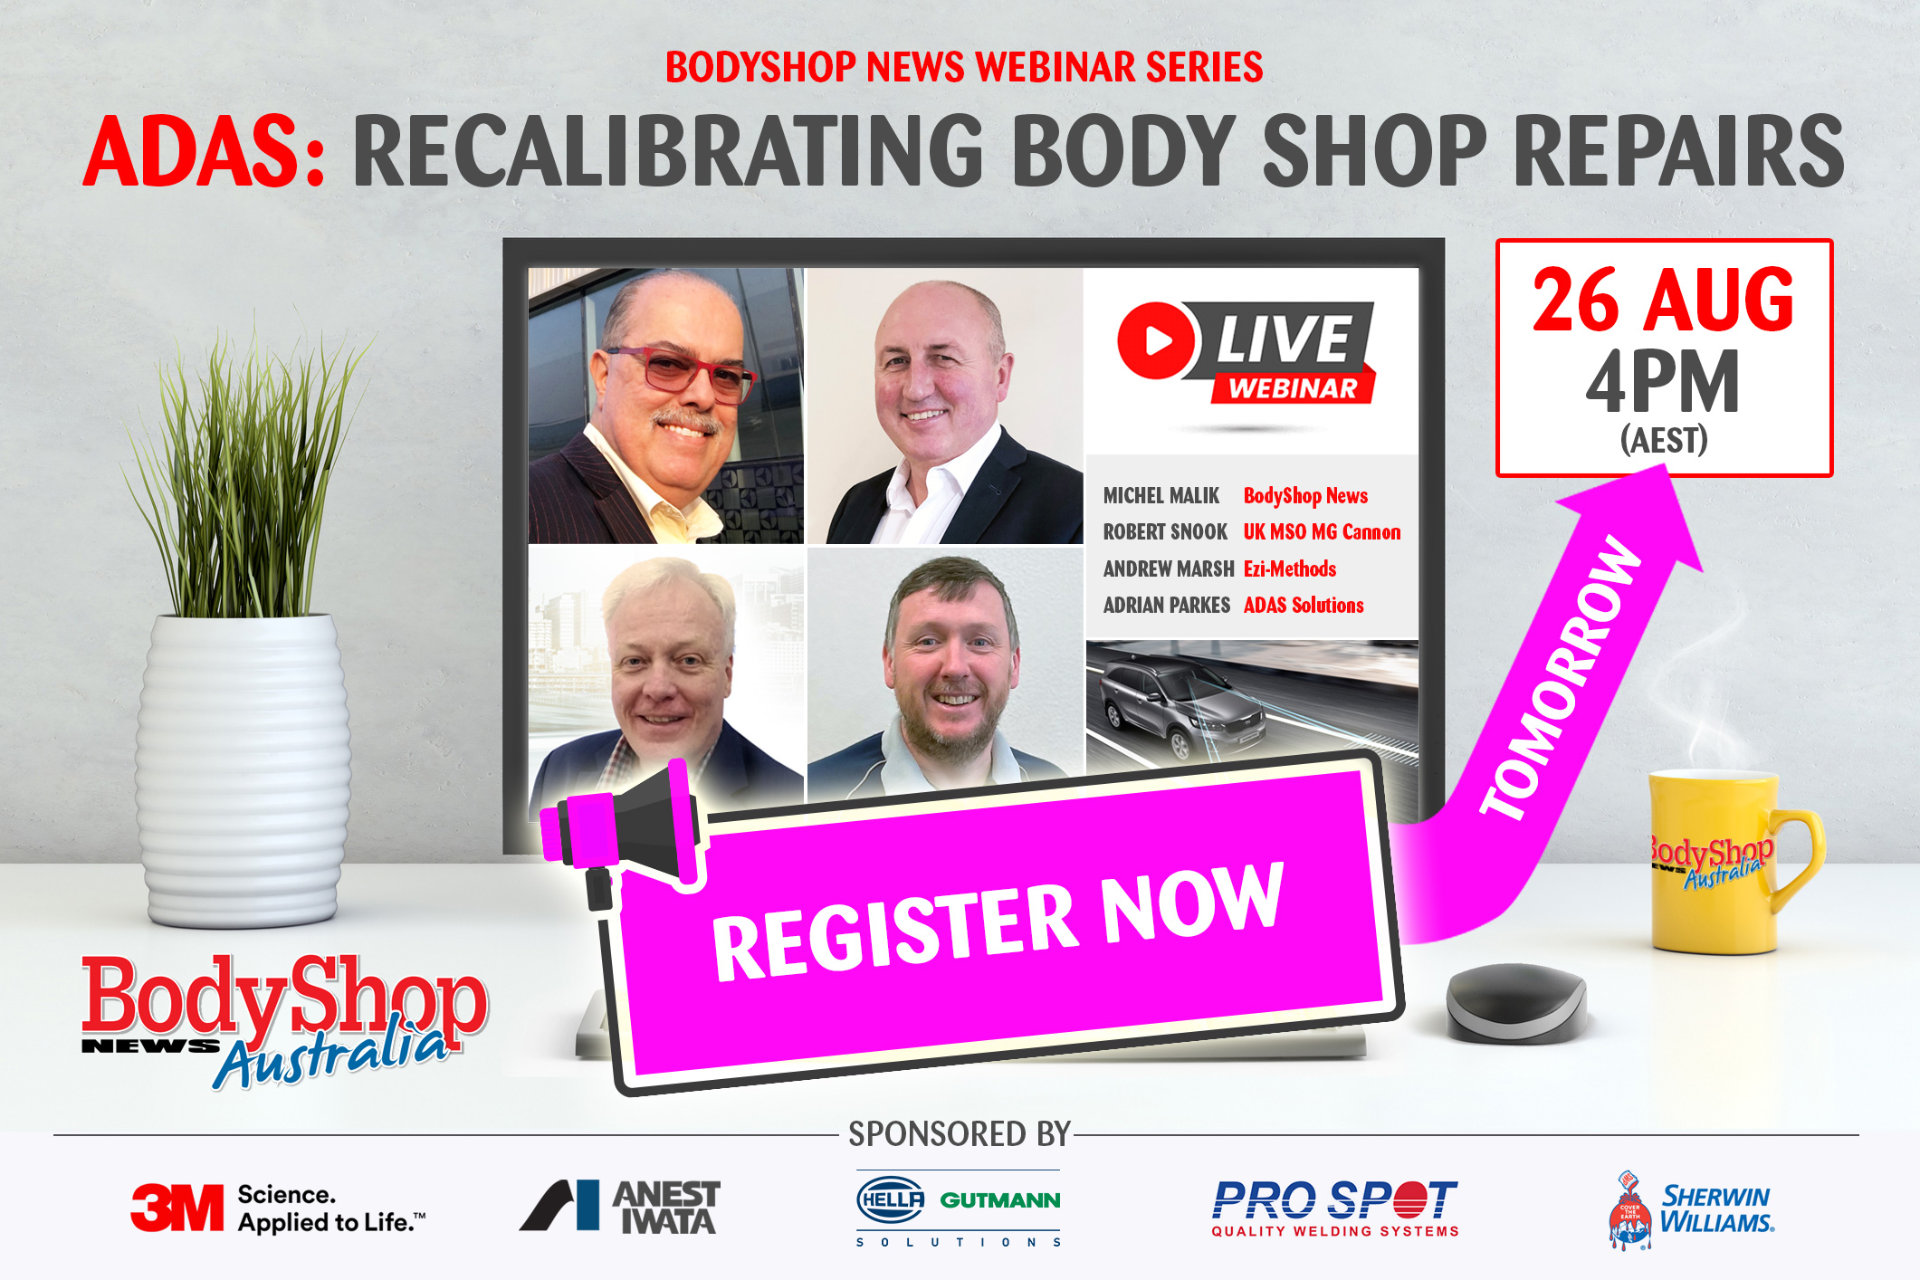 One Day Left To BodyShop News First Webinar